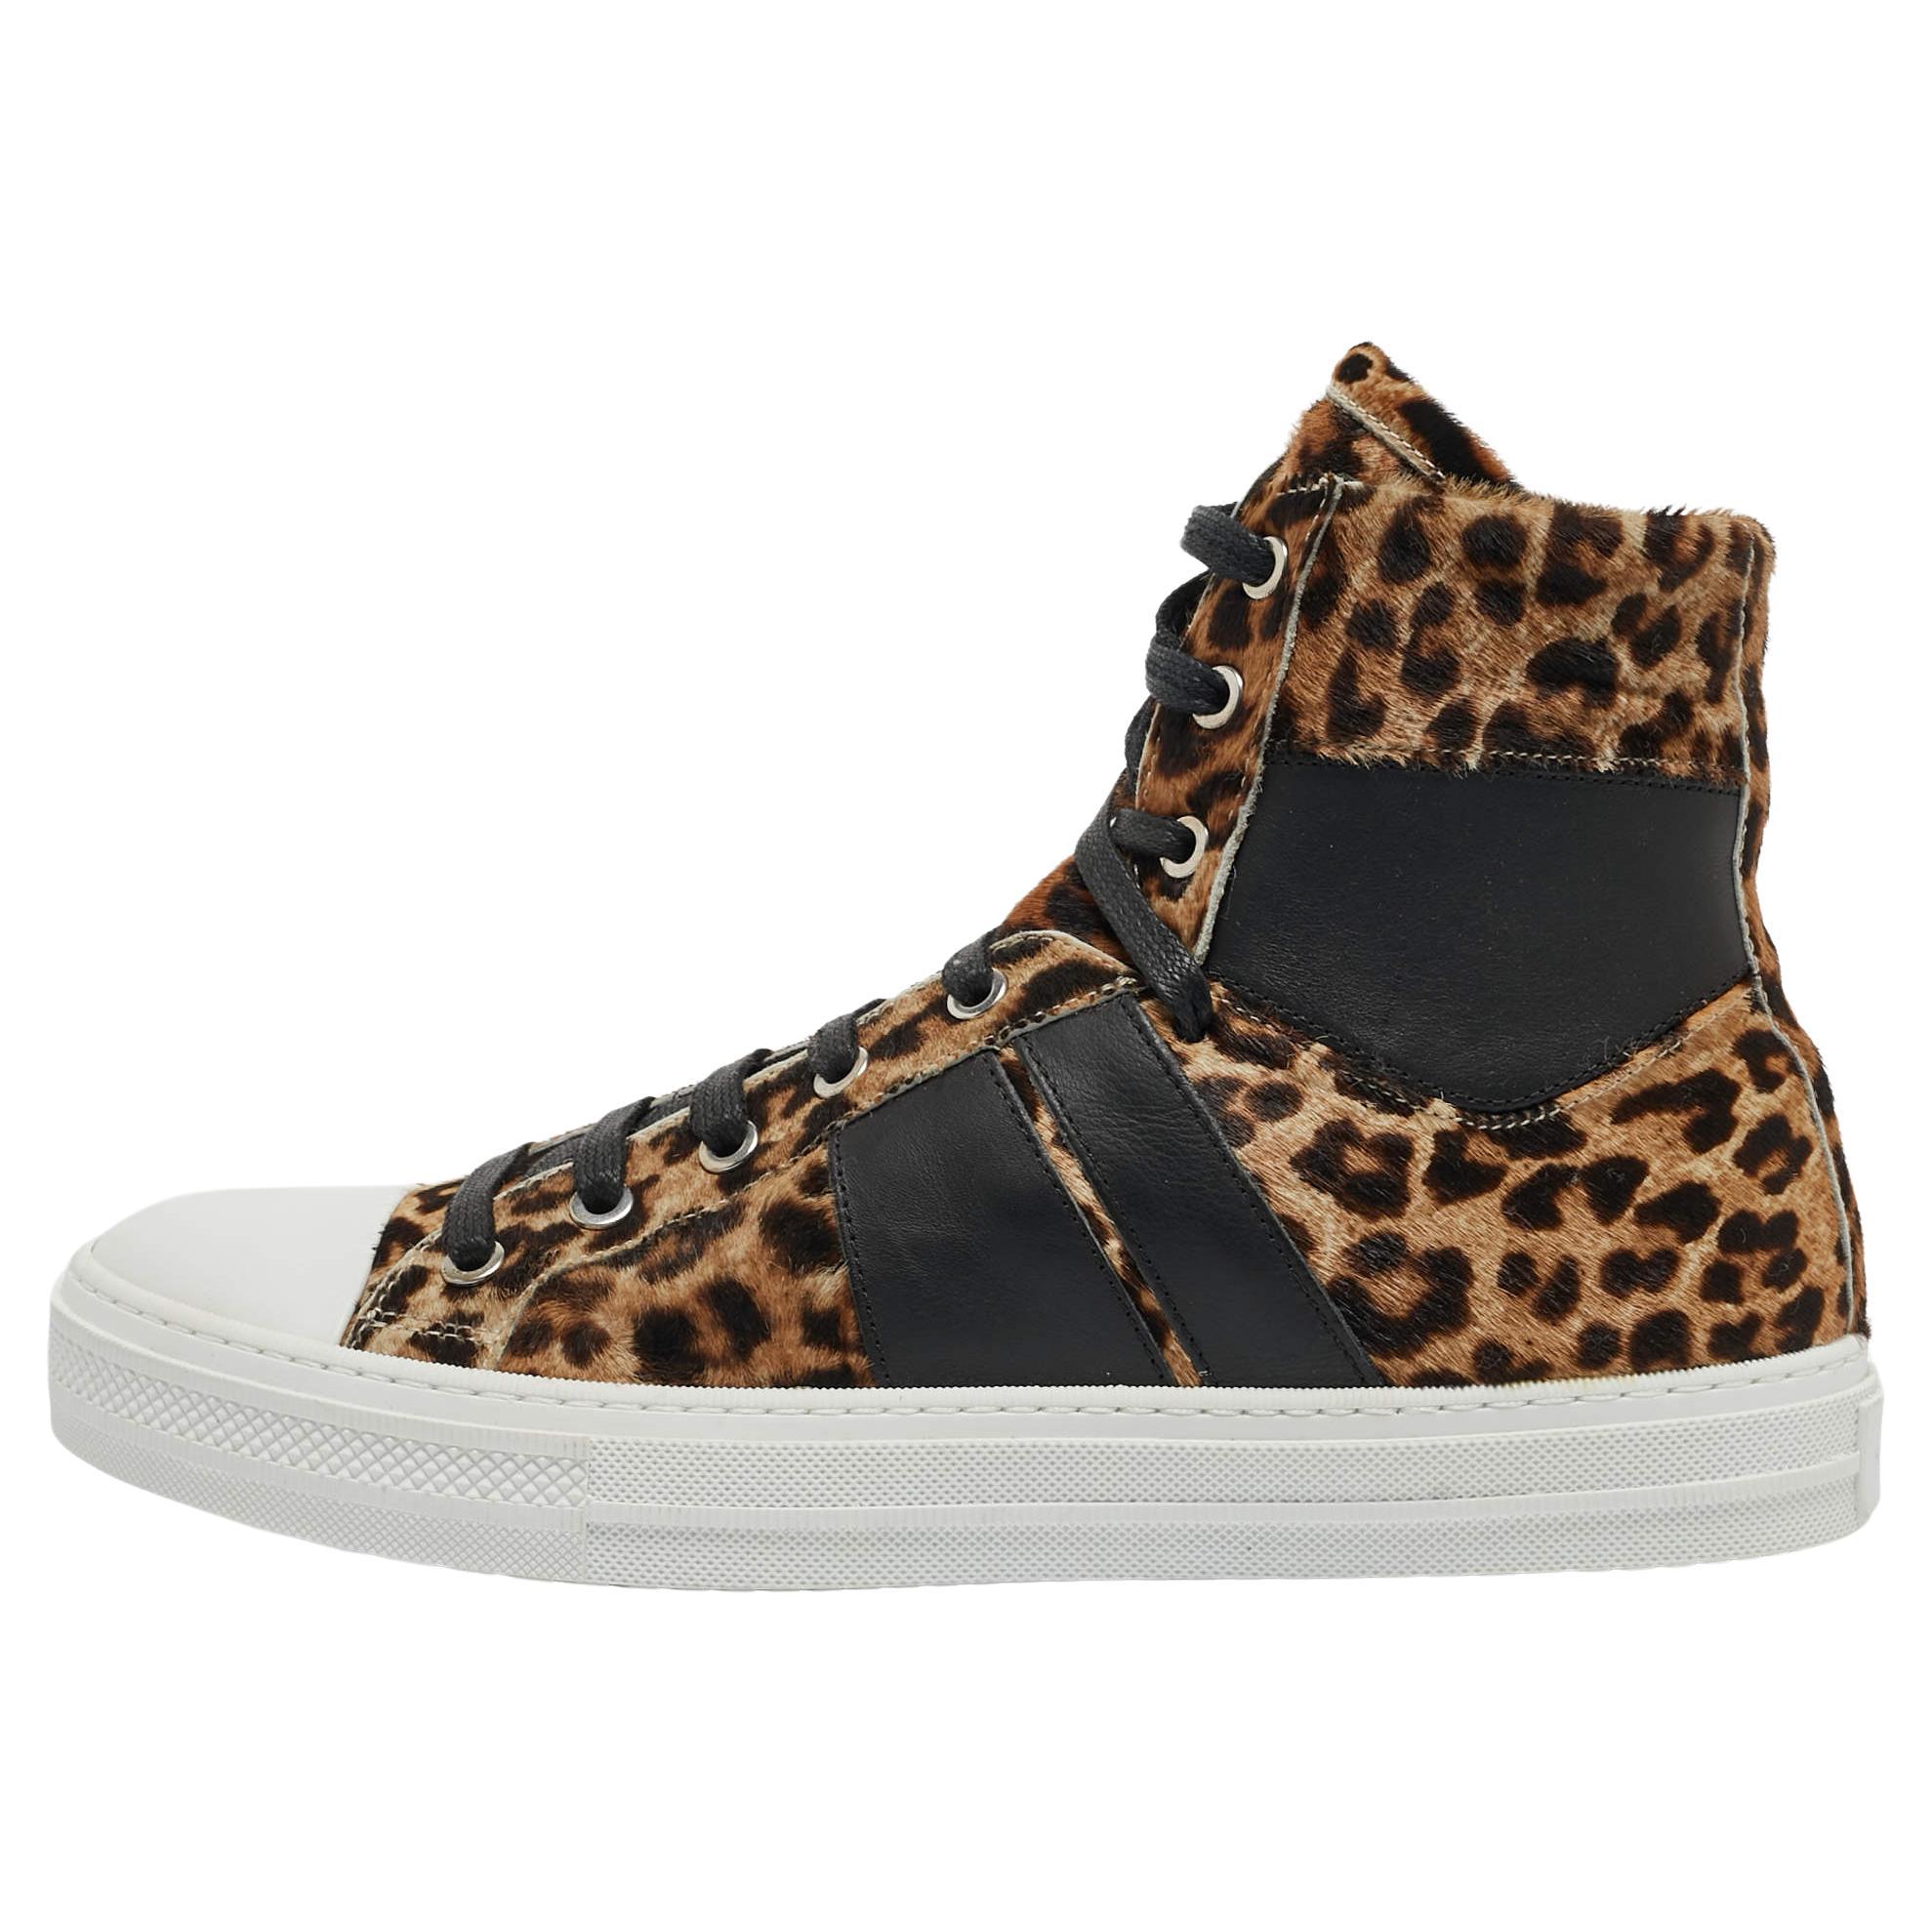 Amiri Calf Hair and Leather Sunset High Top Sneakers Size 41 For Sale